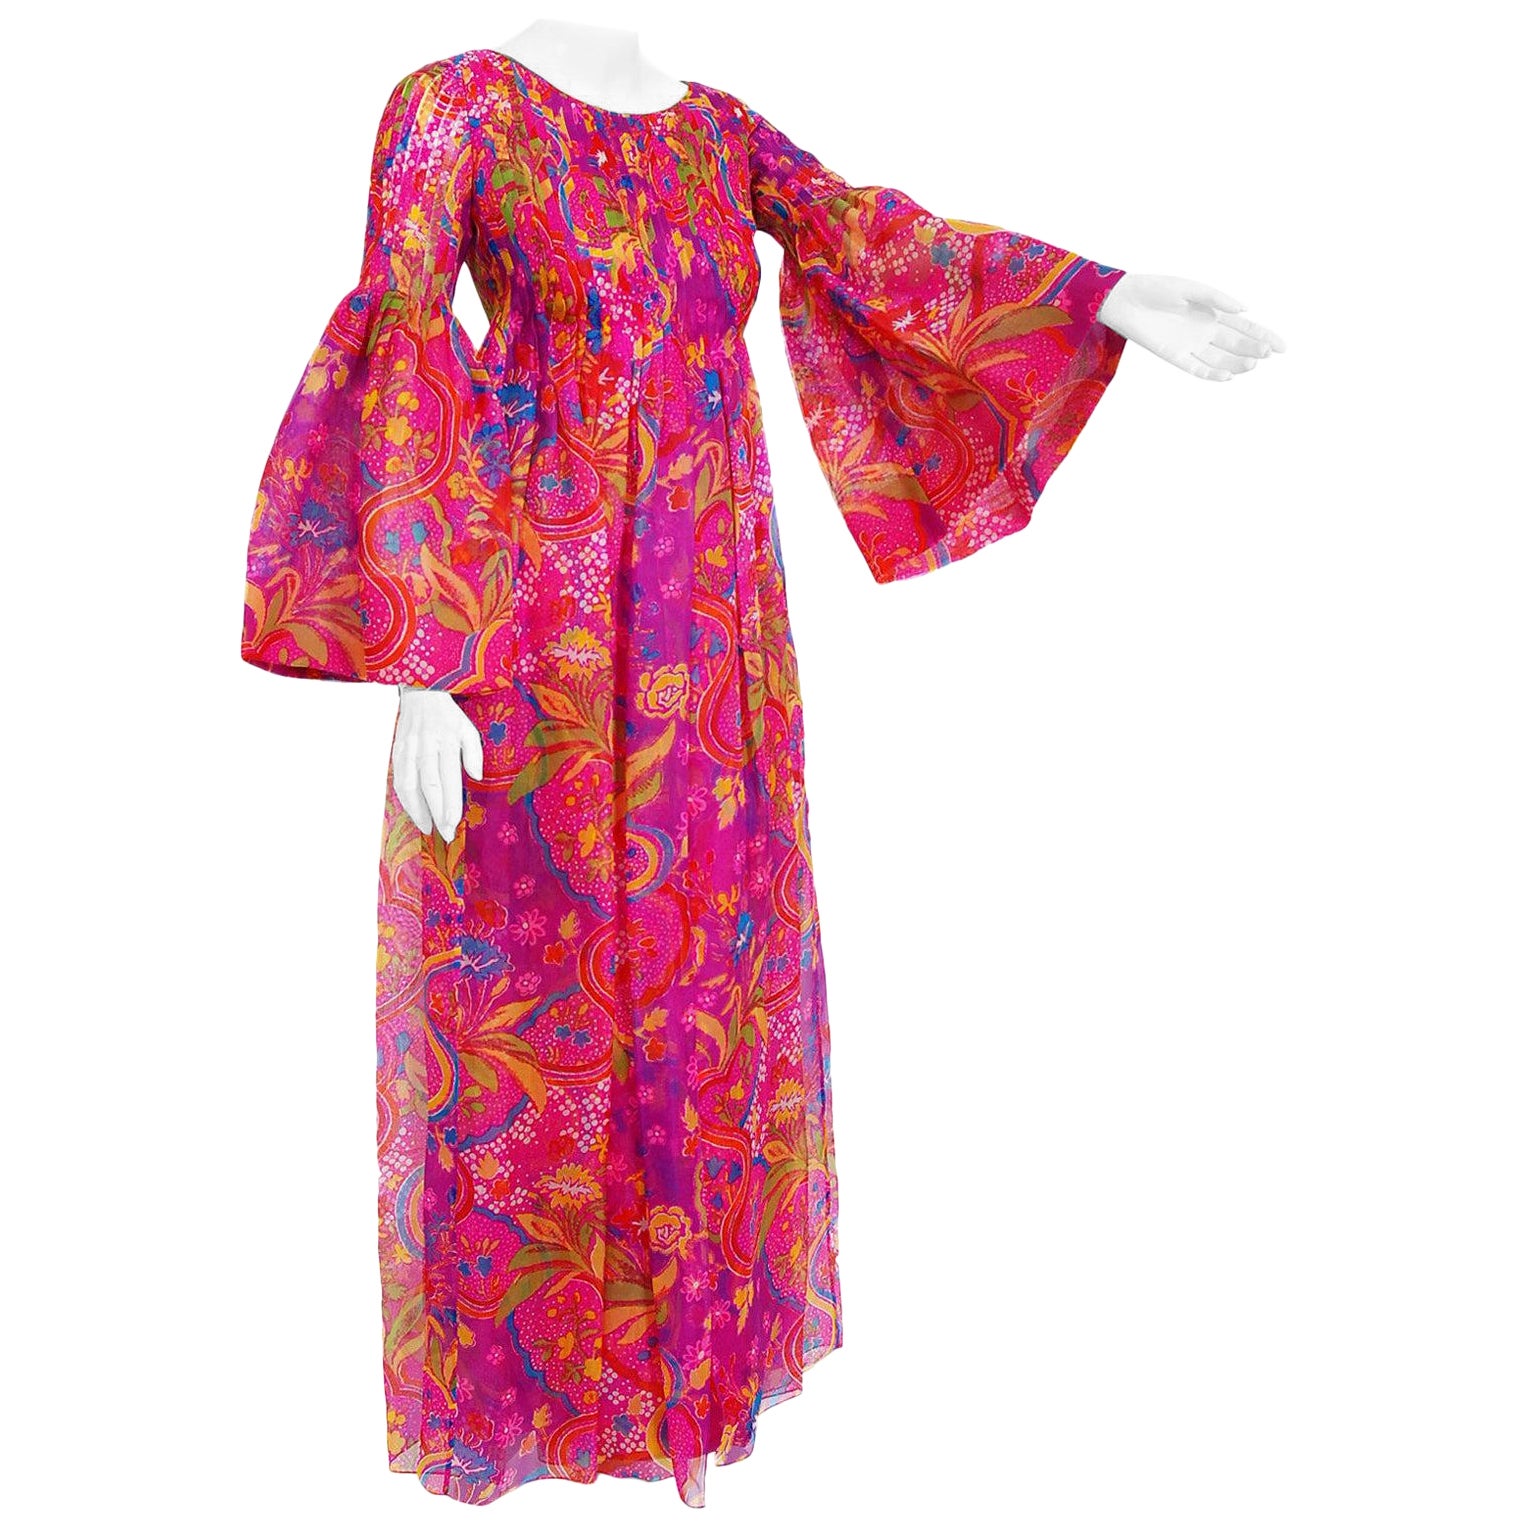 Vintage 1969 Pierre Cardin Pink Psychedelic Print Organza Bell-Sleeve Maxi Dress